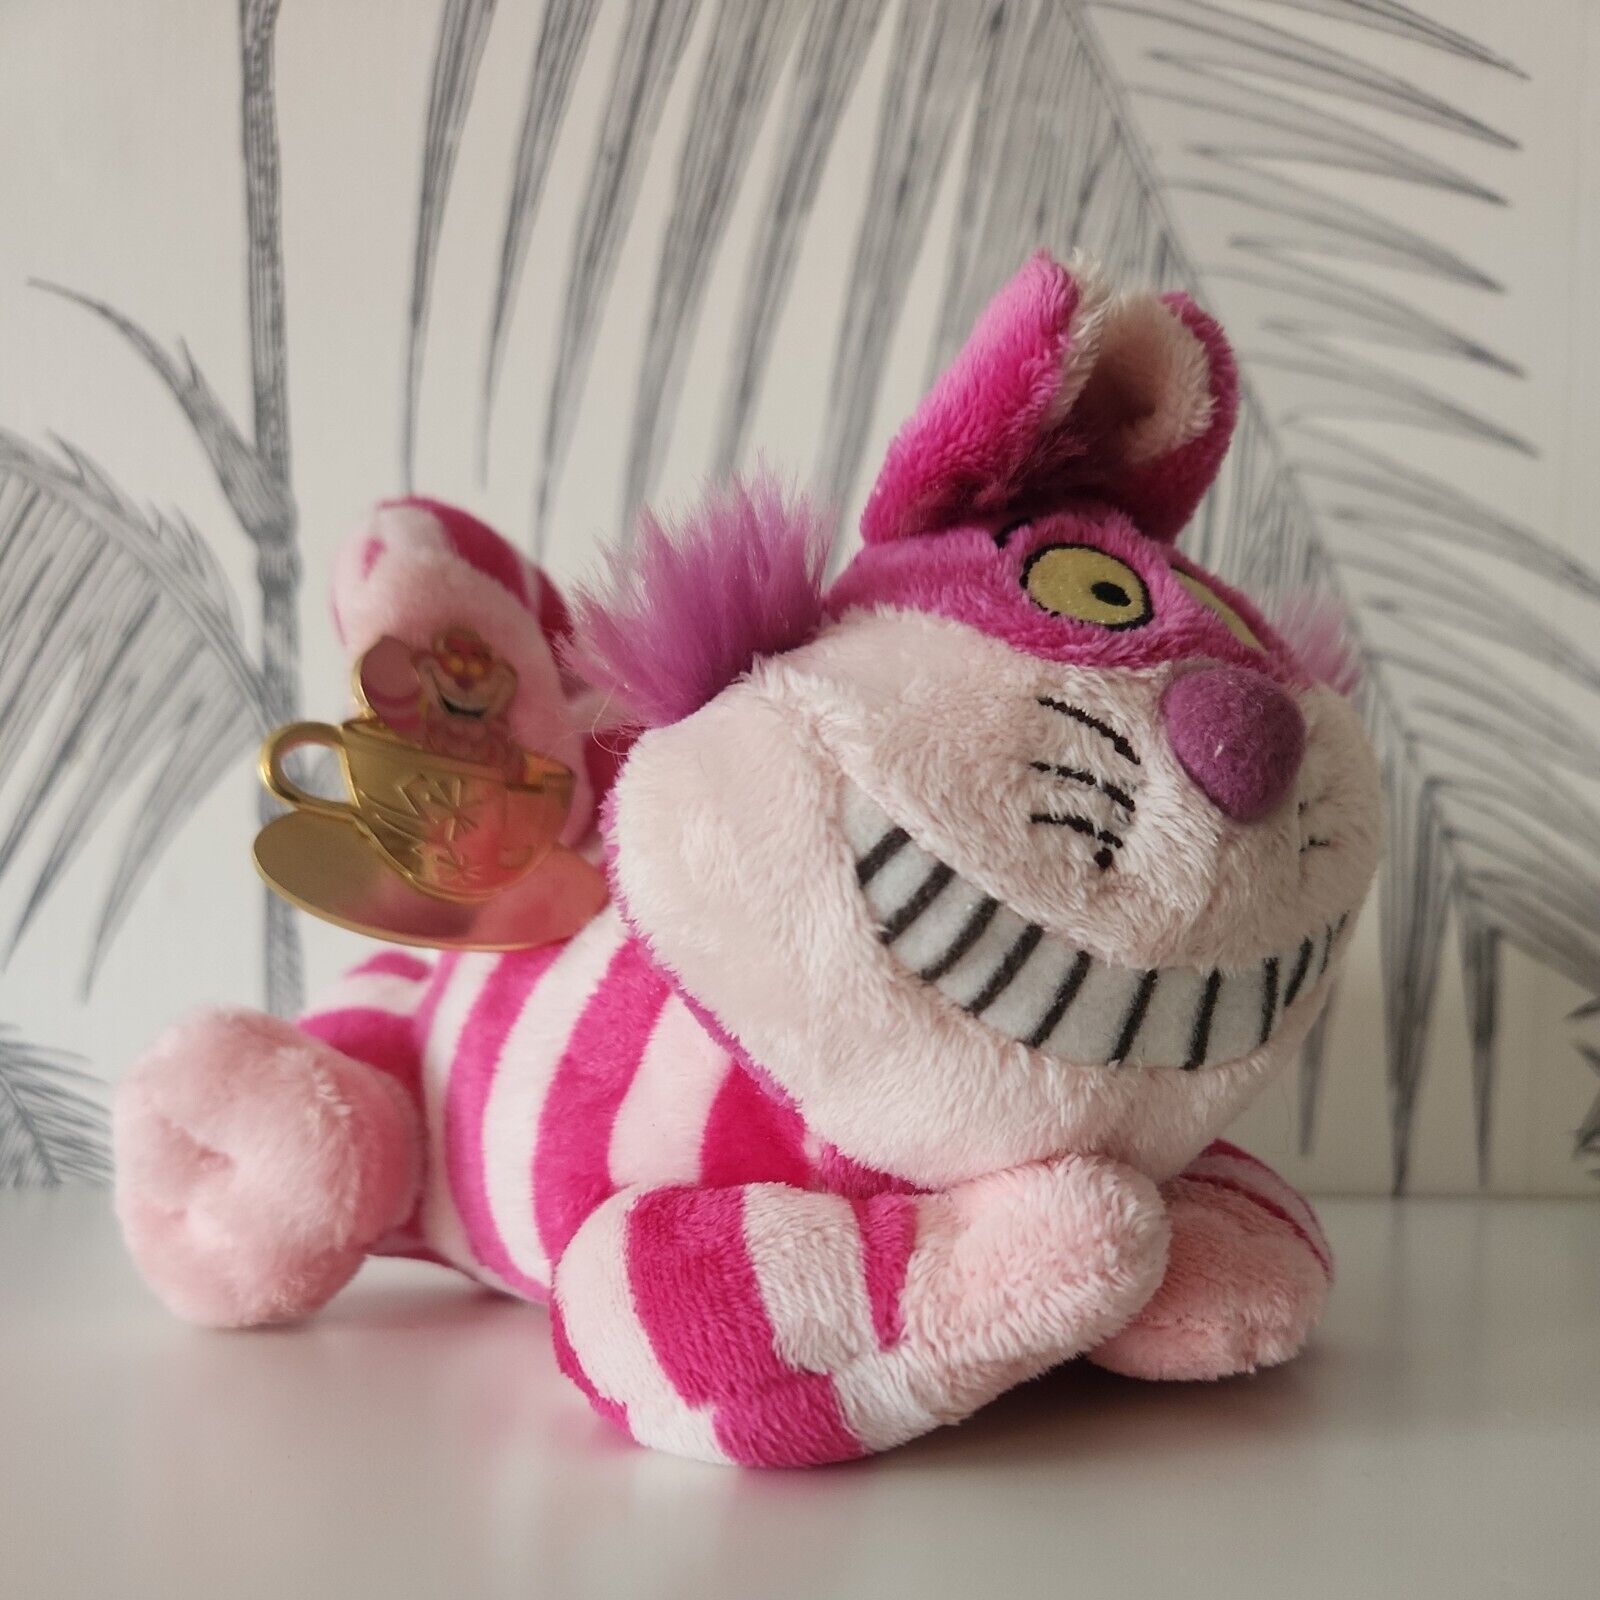 Disney Store Excl. CHESHIRE CAT Plush w/ Golden Vehicles Collection Pin (2005)